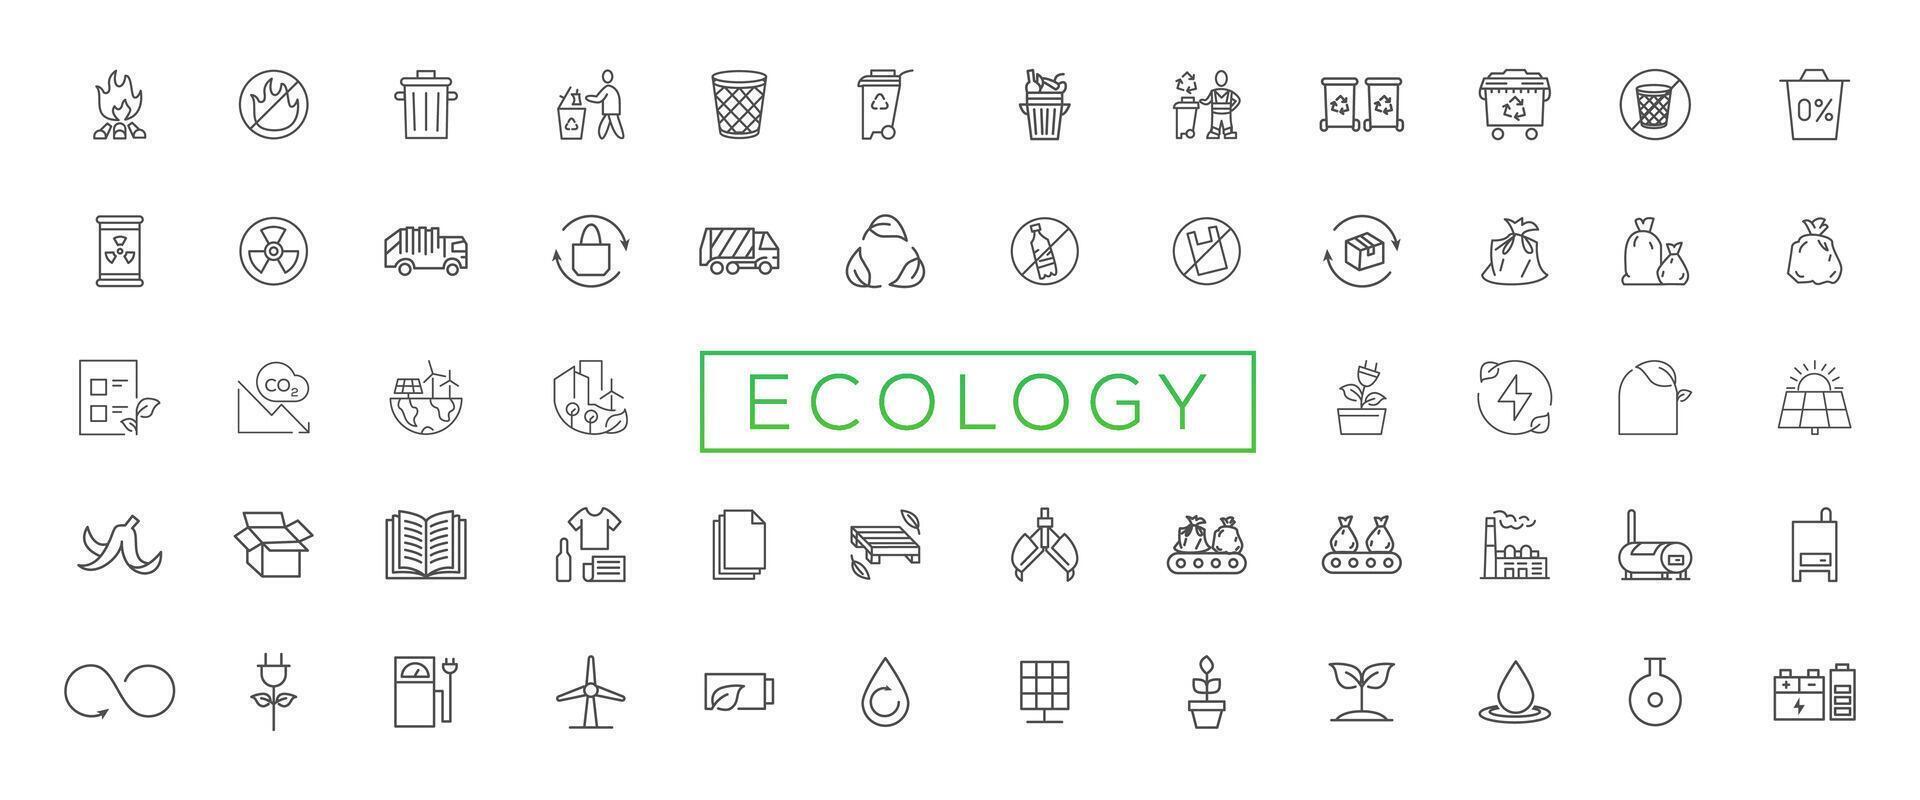 Eco friendly related thin line icon set in minimal style. Linear ecology icons. Environmental sustainability simple symbol vector